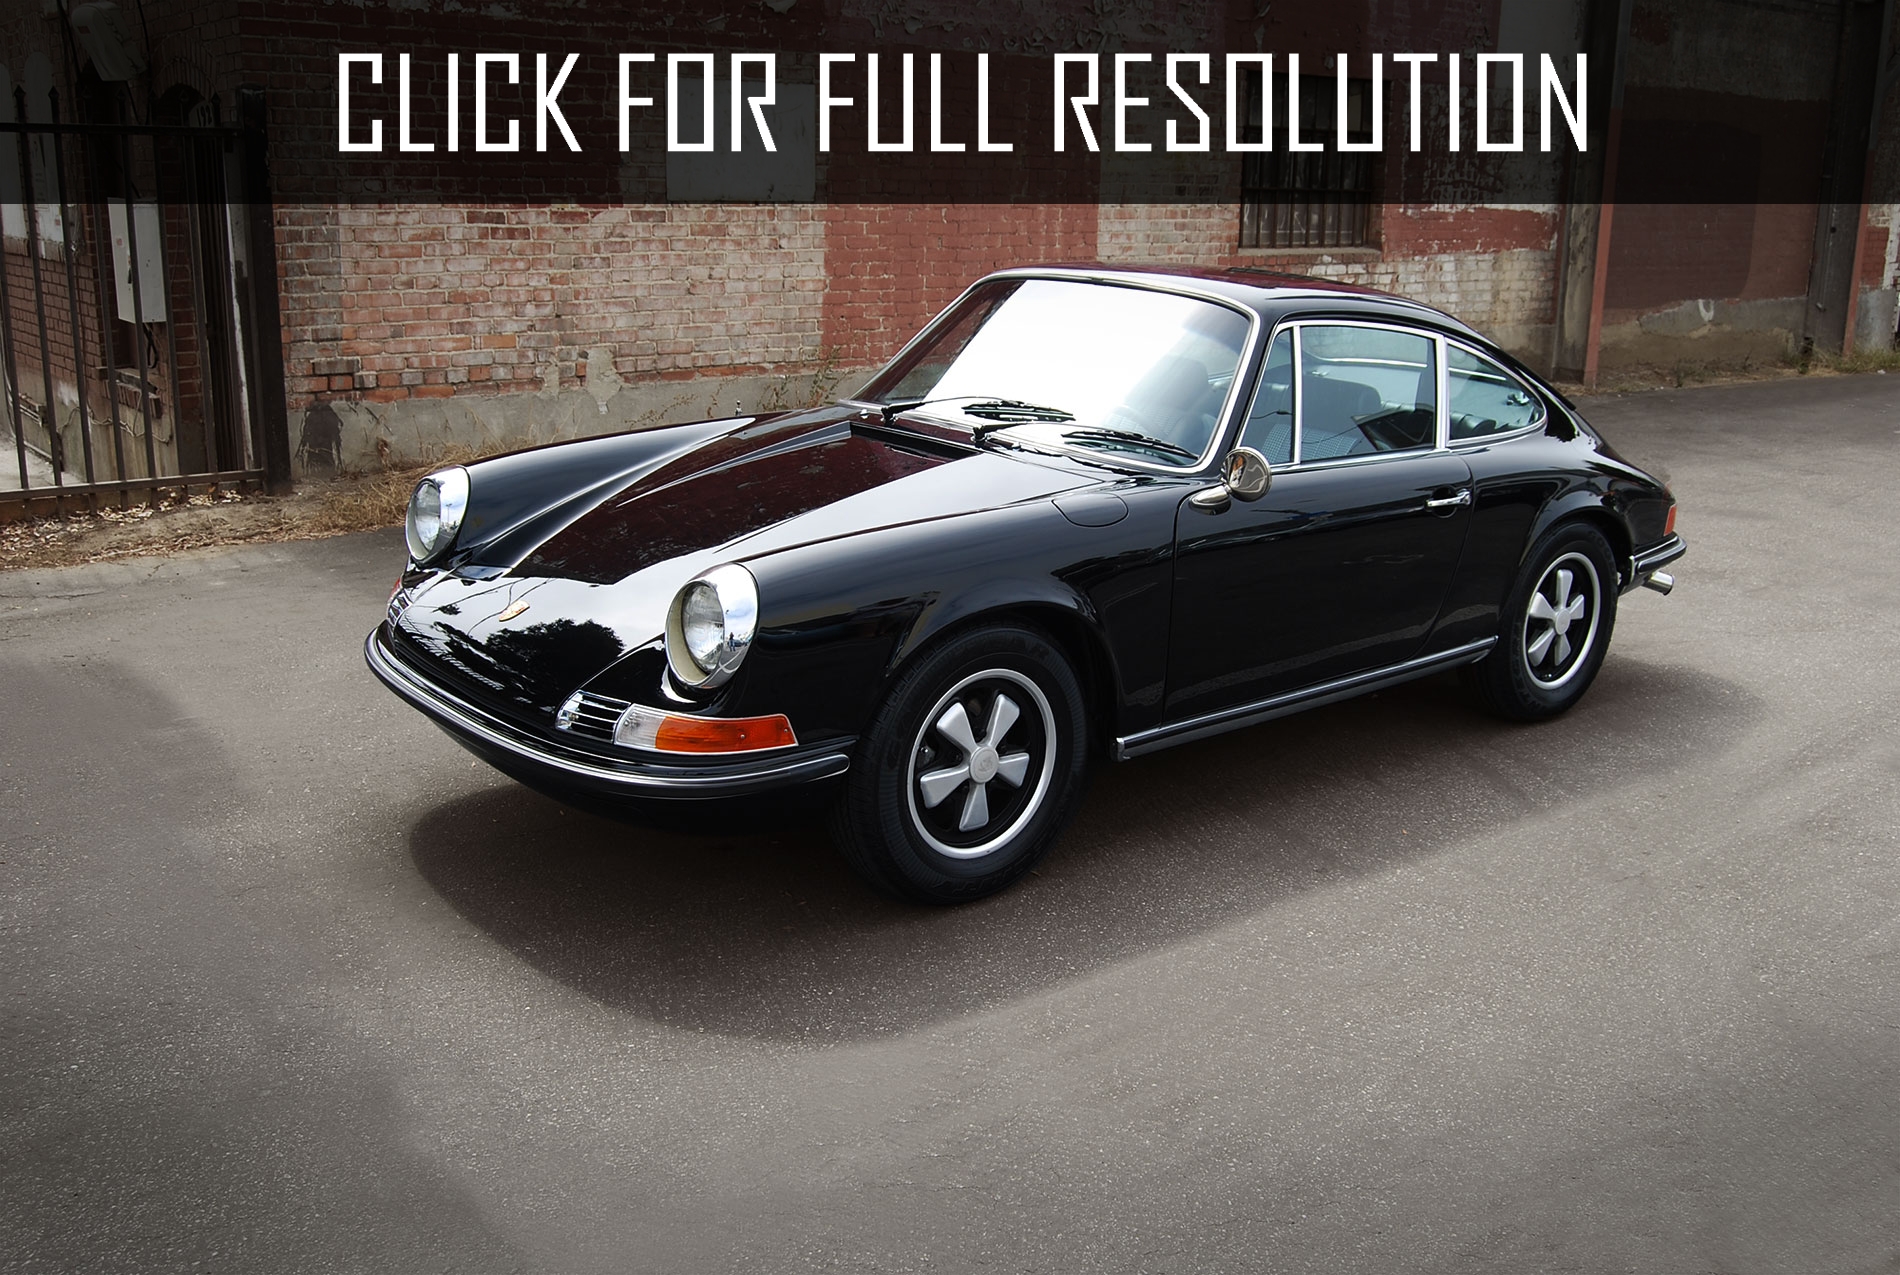 1971 Porsche 911 news, reviews, msrp, ratings with